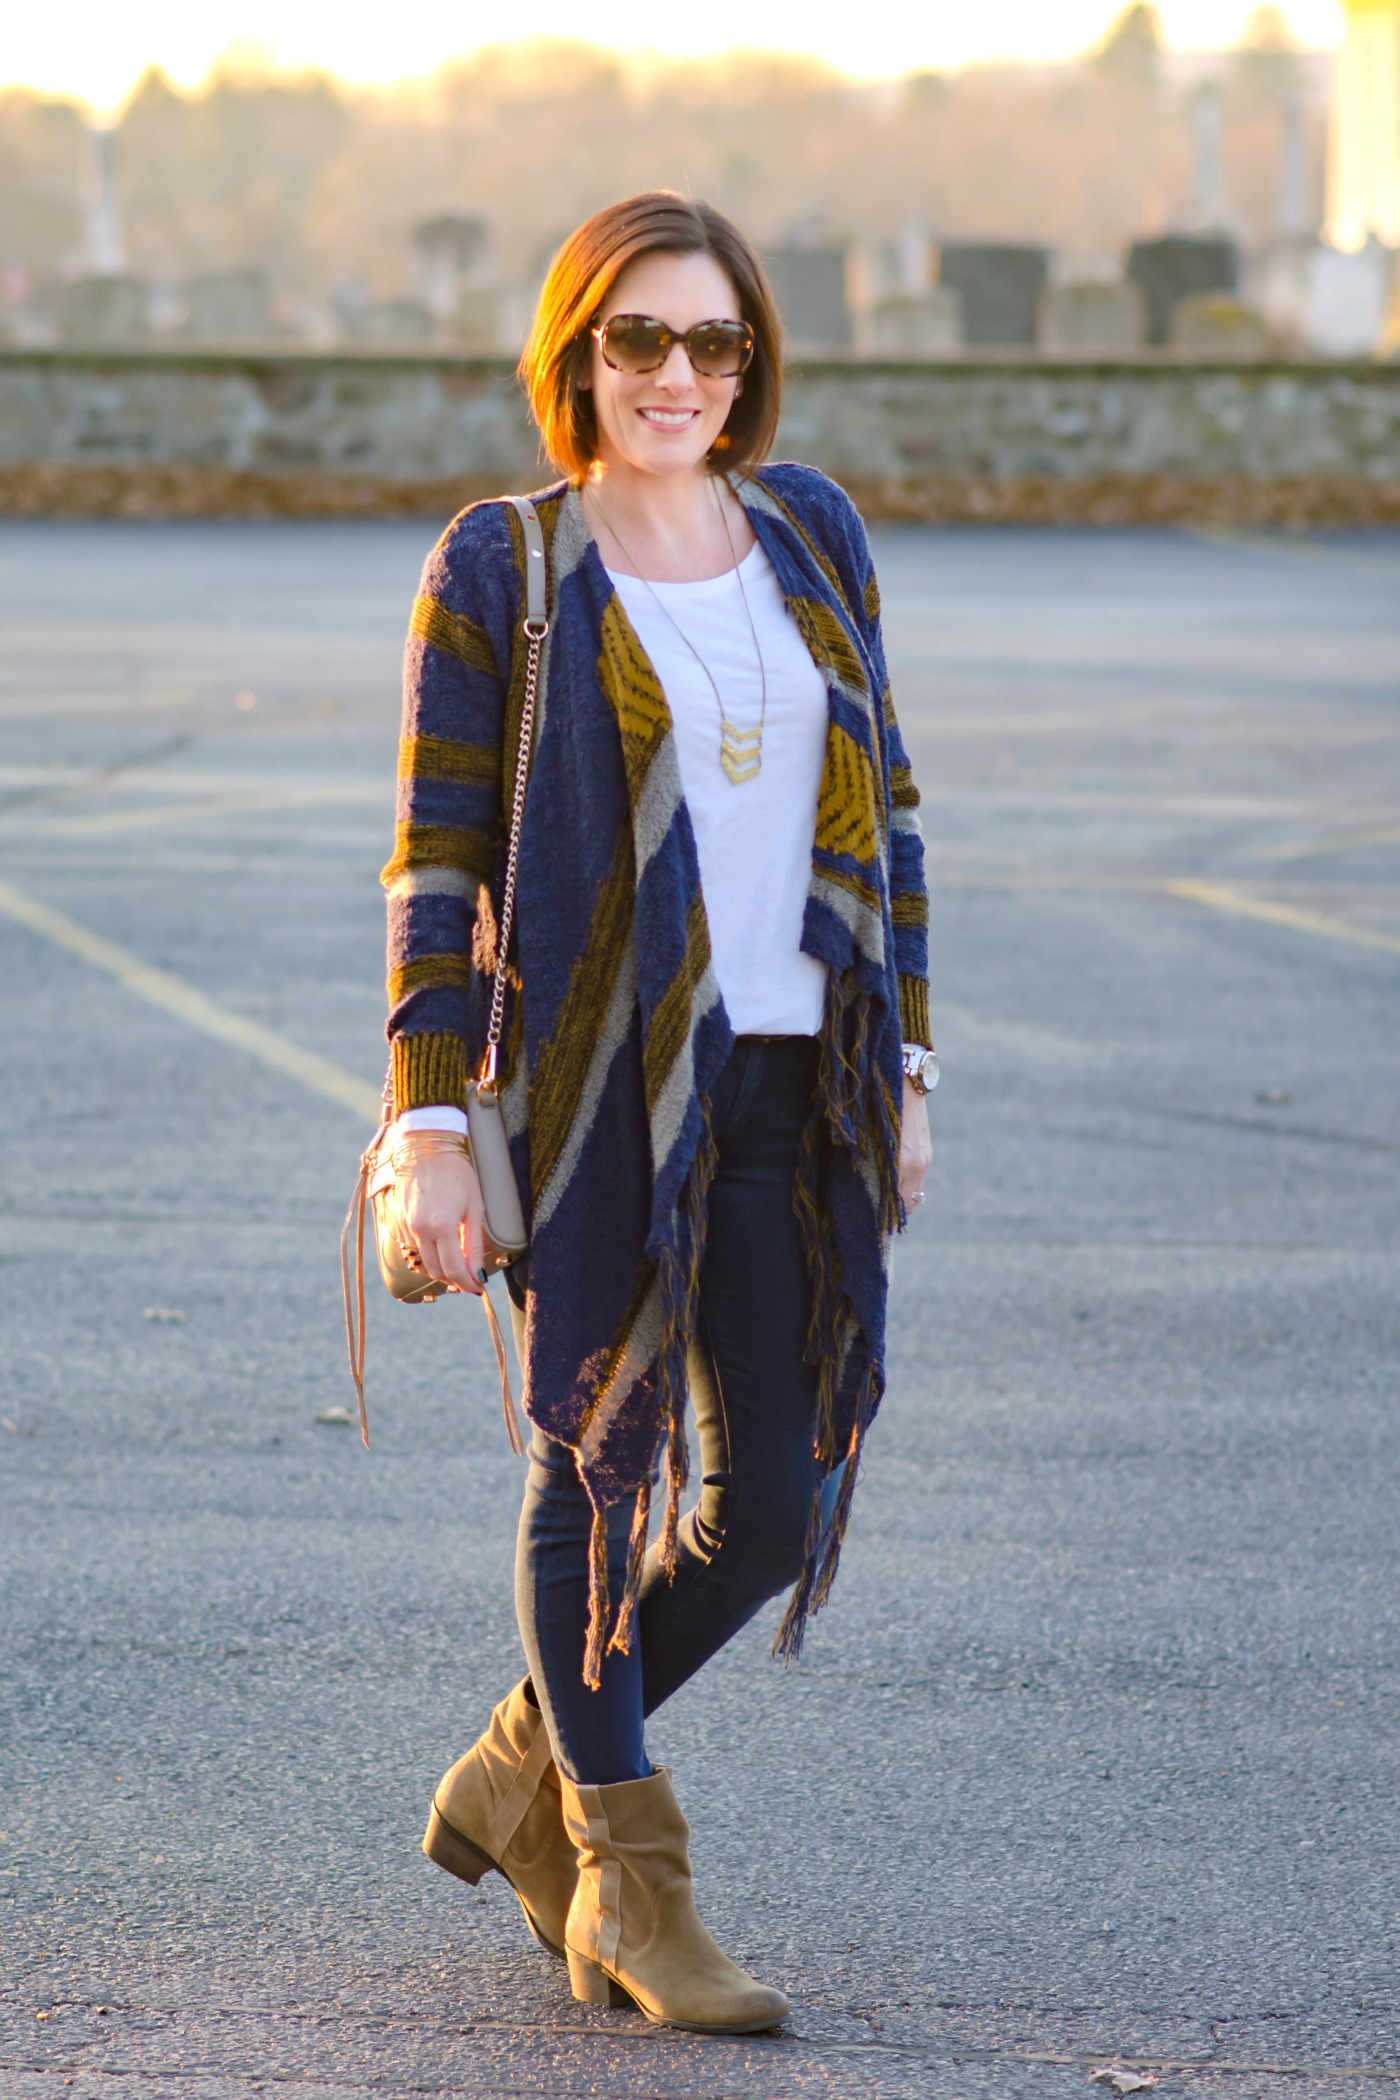 Winter Outfit Ideas: How to Wear a Drape Front Cardigan